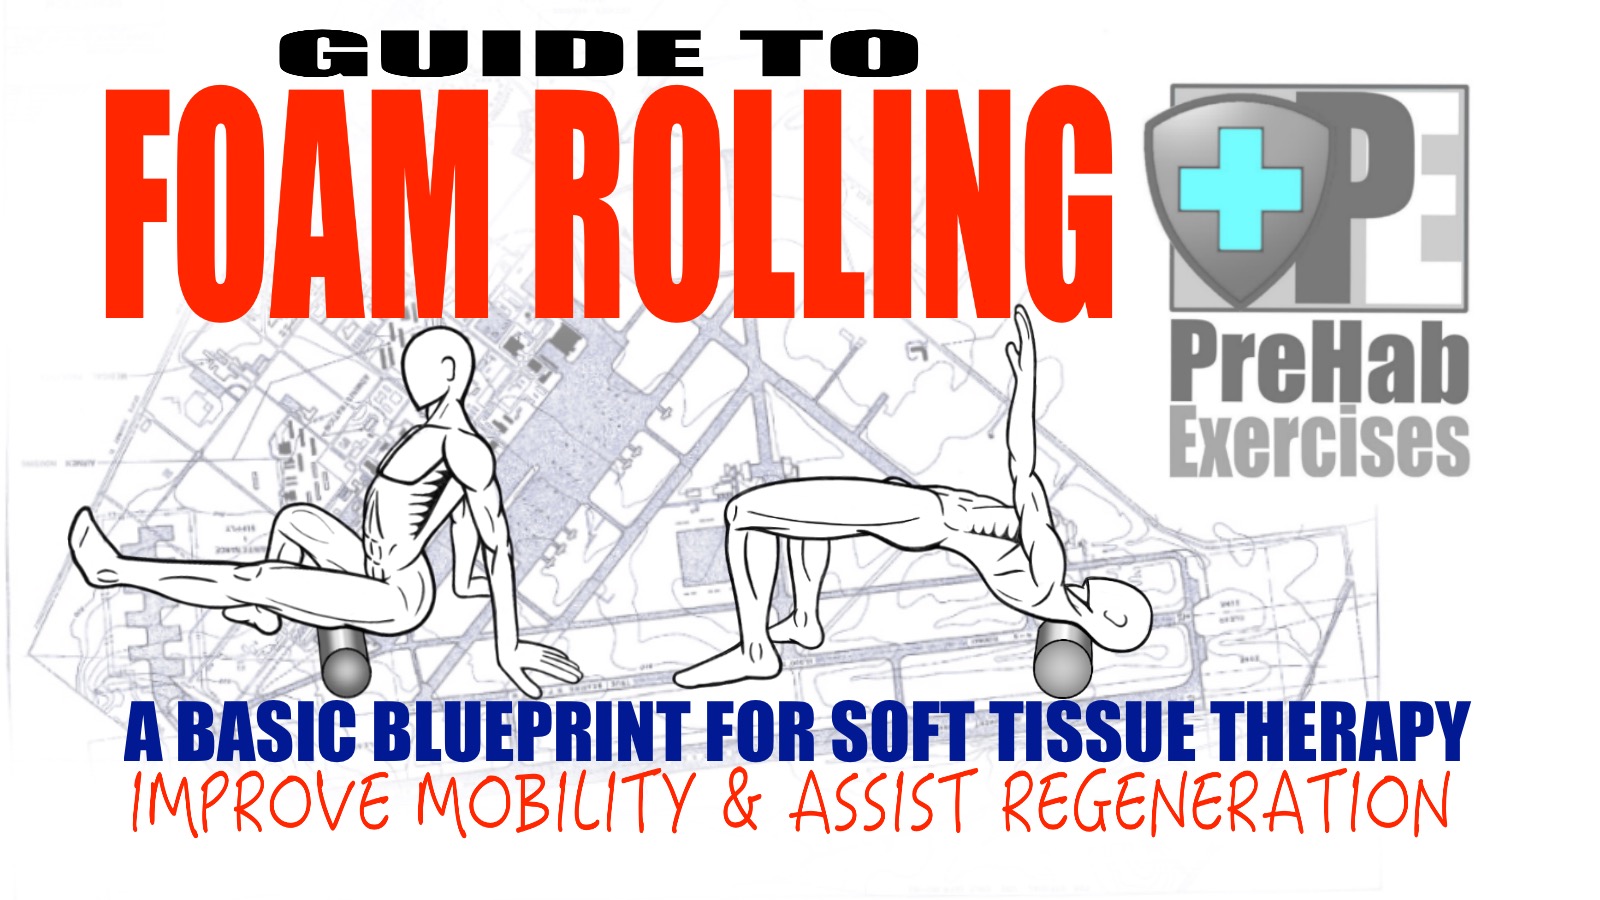 Foam Roller Techniques for Massage, Stretches and Improved